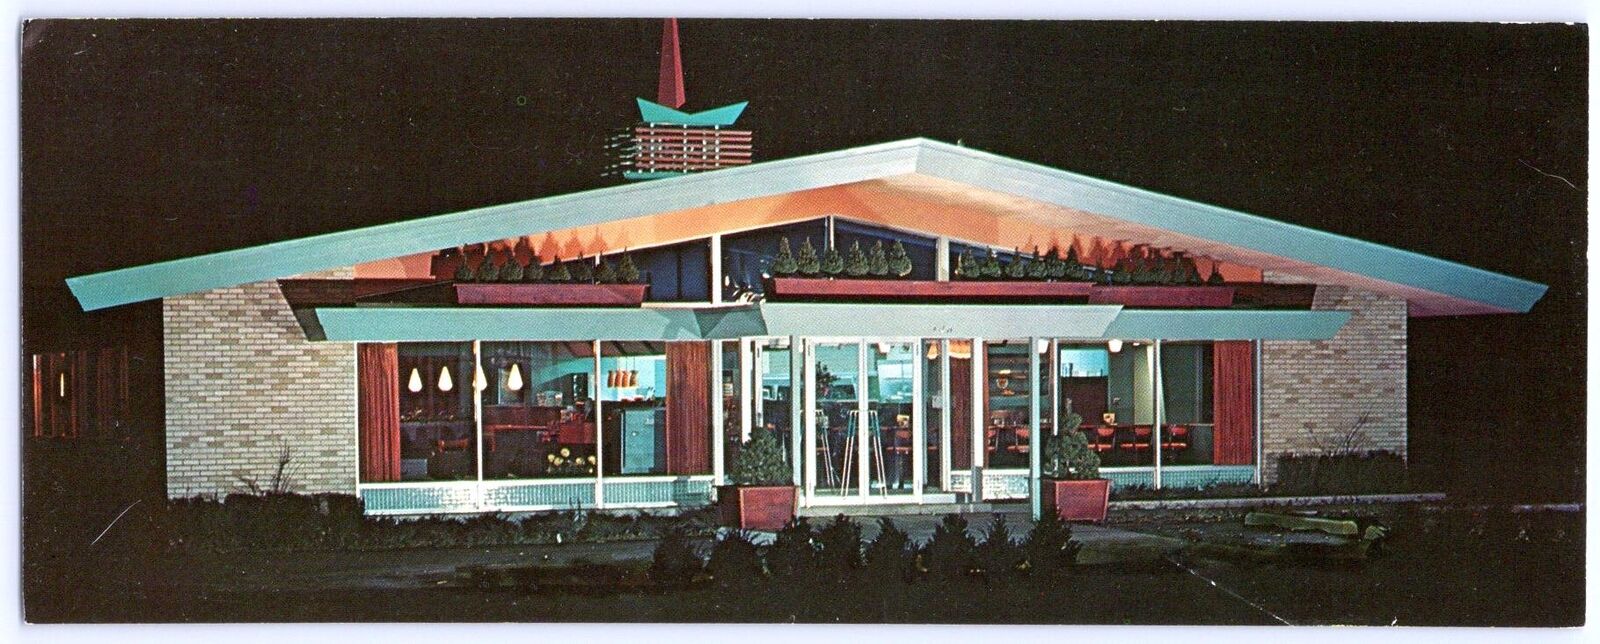 1950's SOUTH BEND INDIANA HOLLY HOUSE RESTAURANT AT NIGHT PANORAMIC POSTCARD